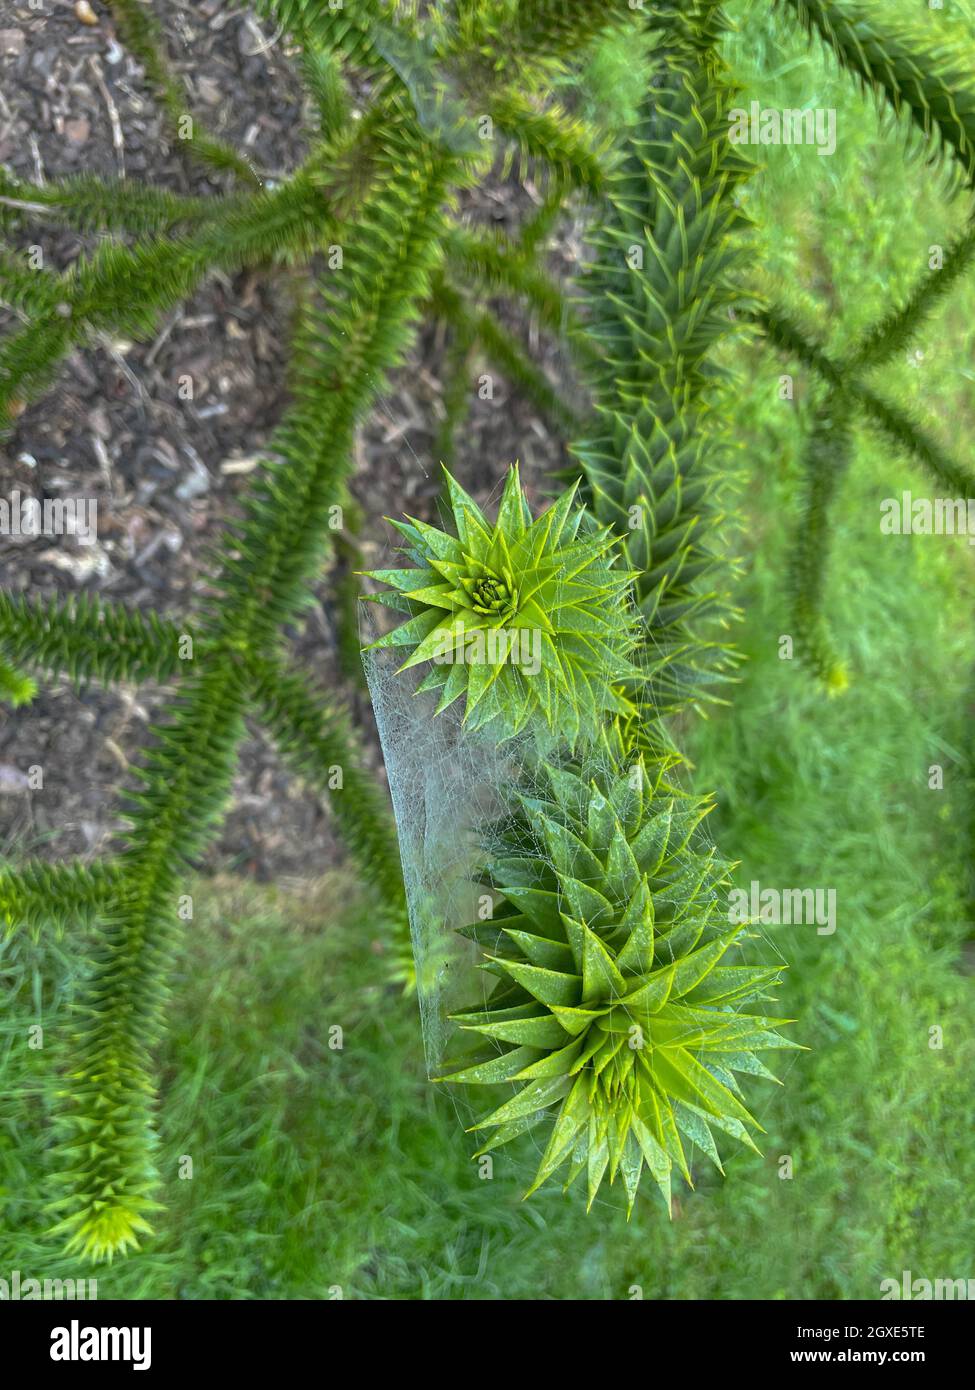 Early Morning Spider's Web on the Branch of a Monkey Puzzle Tree in a Garden in Rural Devon, England, UK Stock Photo